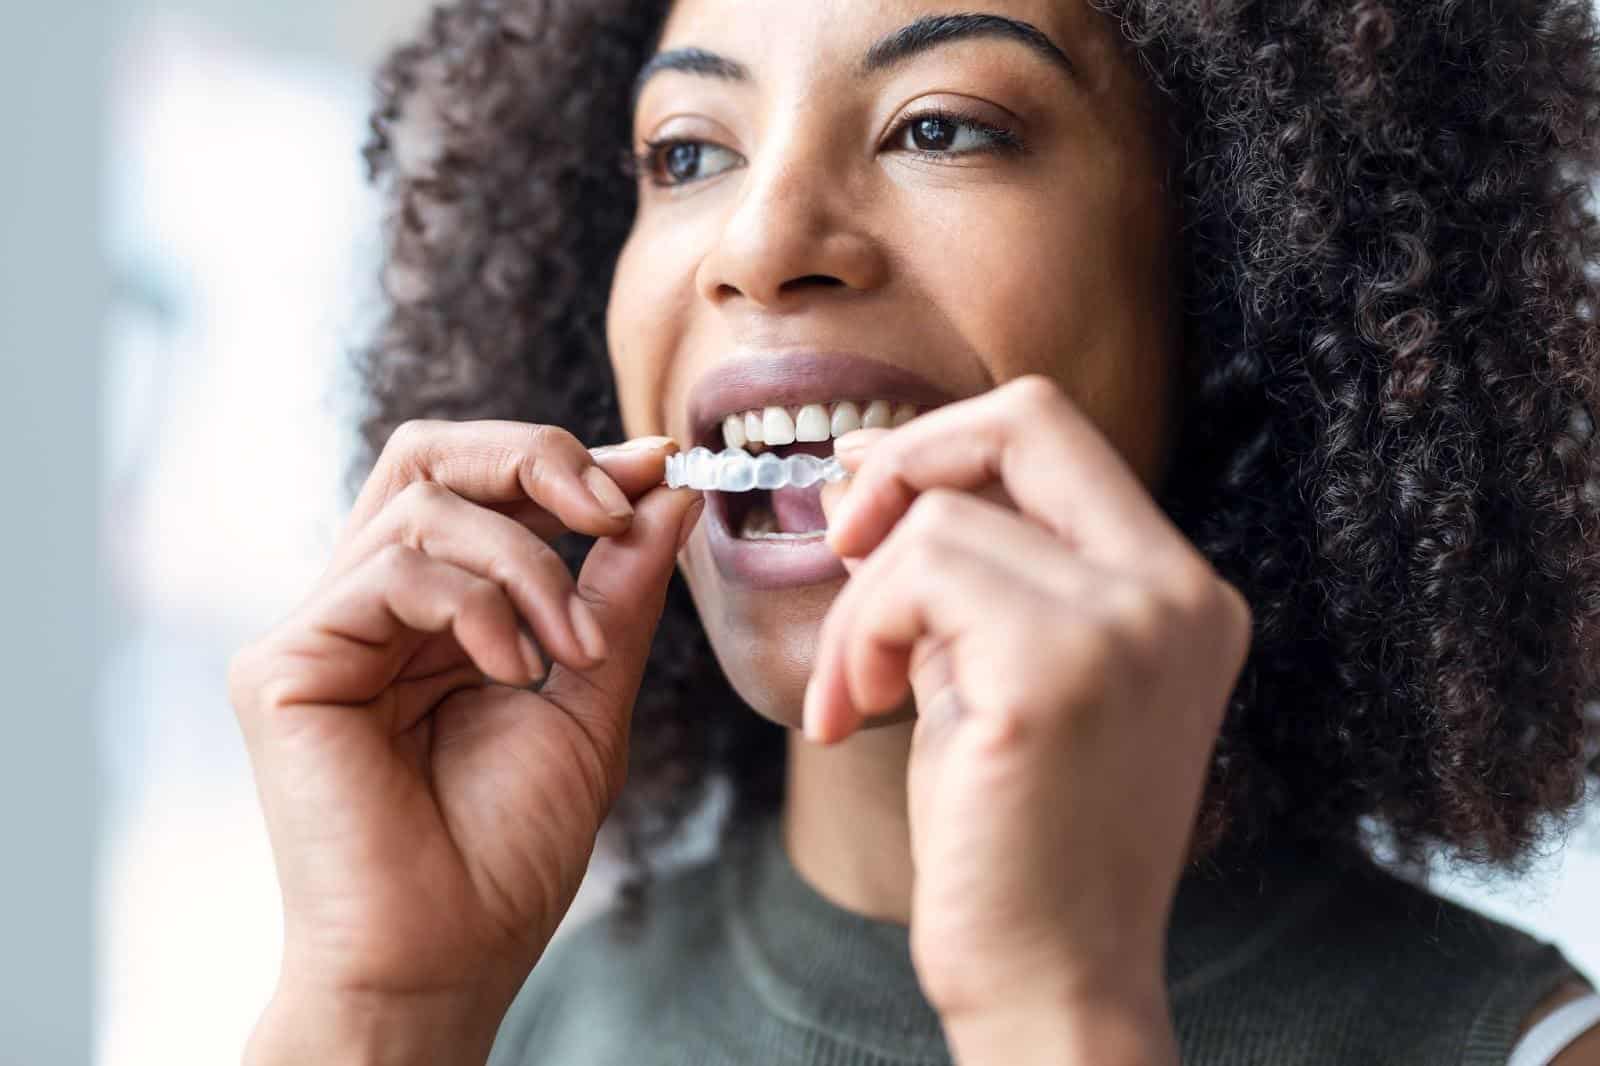 Incorporate Chewies With Your Invisalign Treatment at Rockefeller Cosmetic Dentistry